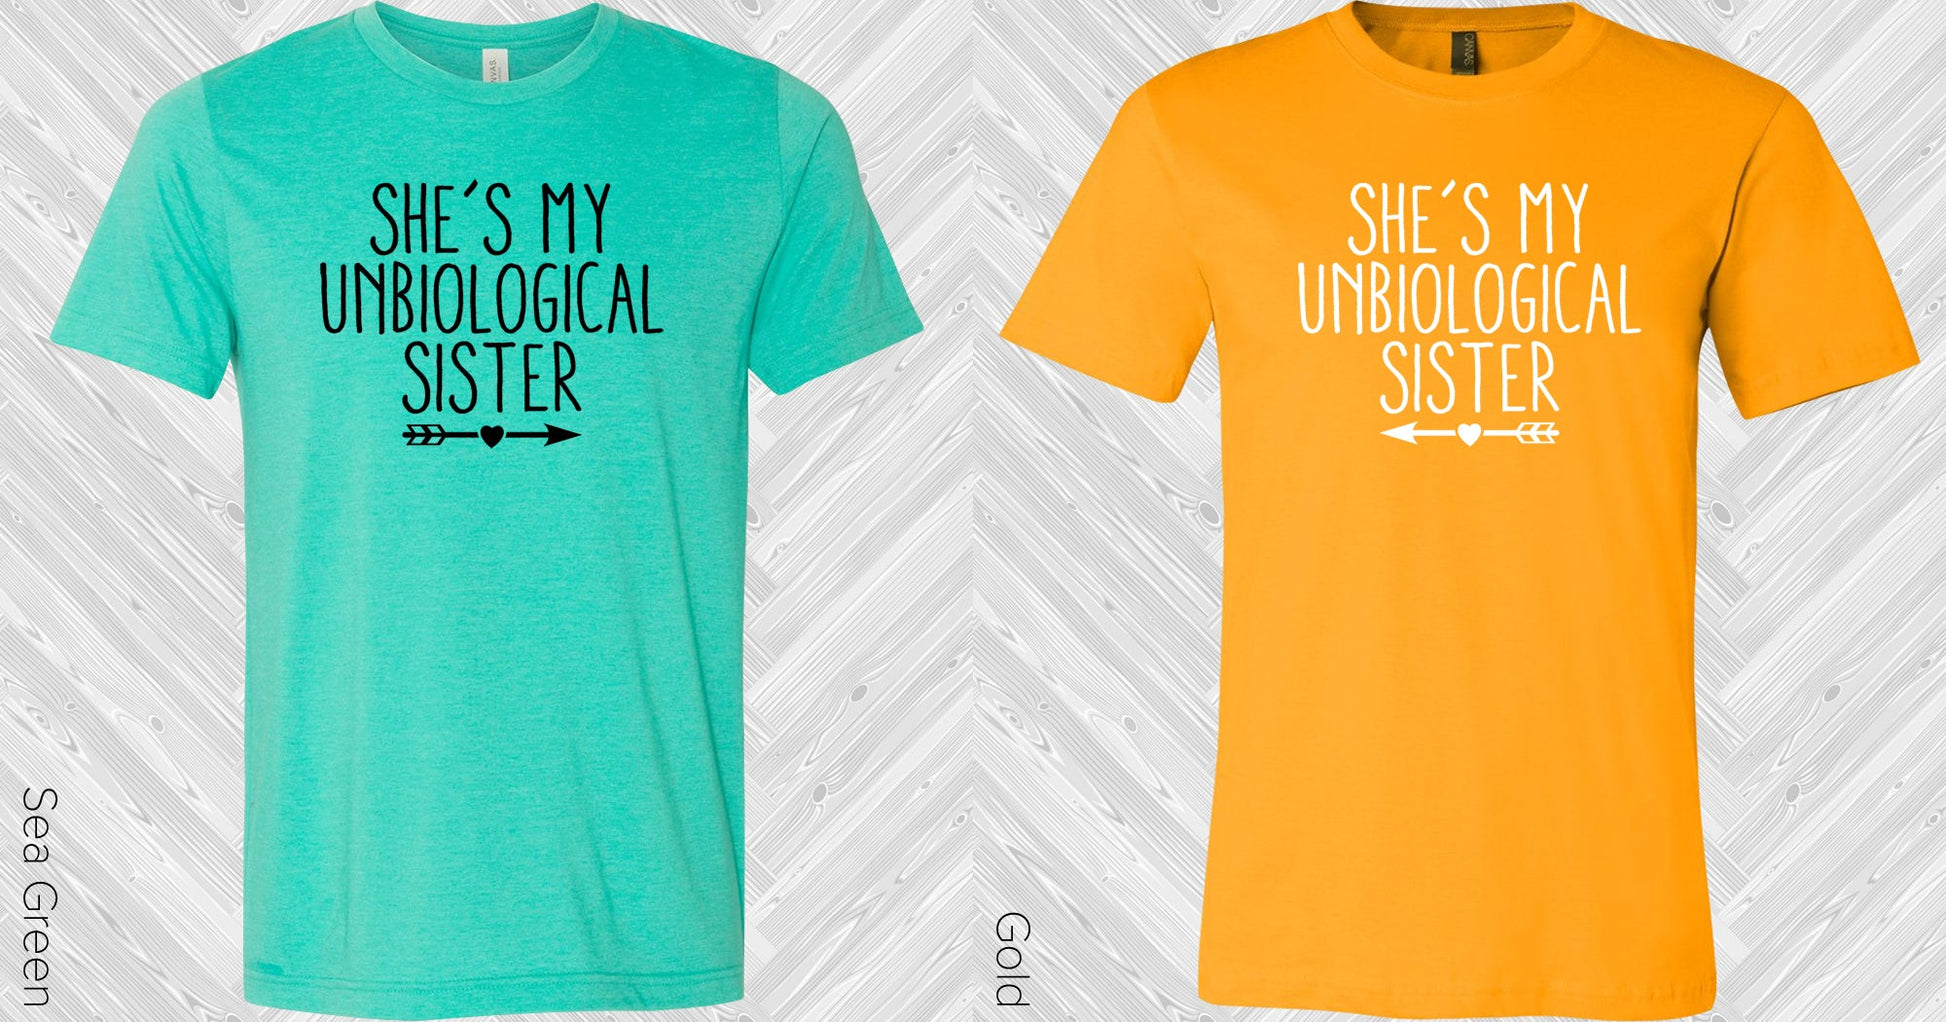 Shes My Unbiological Sister (Left Shirt Arrow Pointing Right) Graphic Tee Graphic Tee